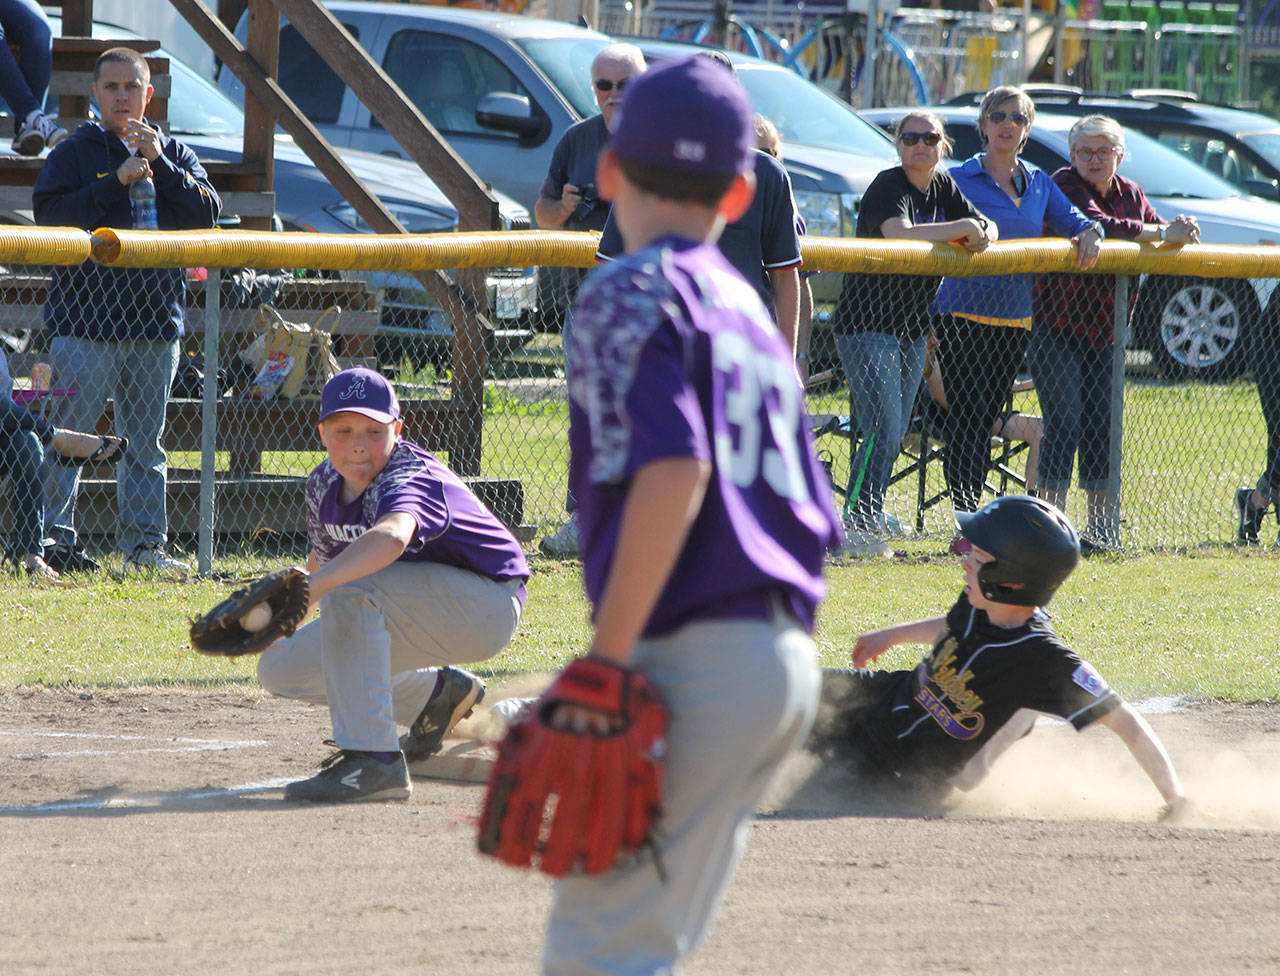 Nate Moore slides into third base ahead of a tag. (Photo by Jim Waller/Whidbey News-Times)